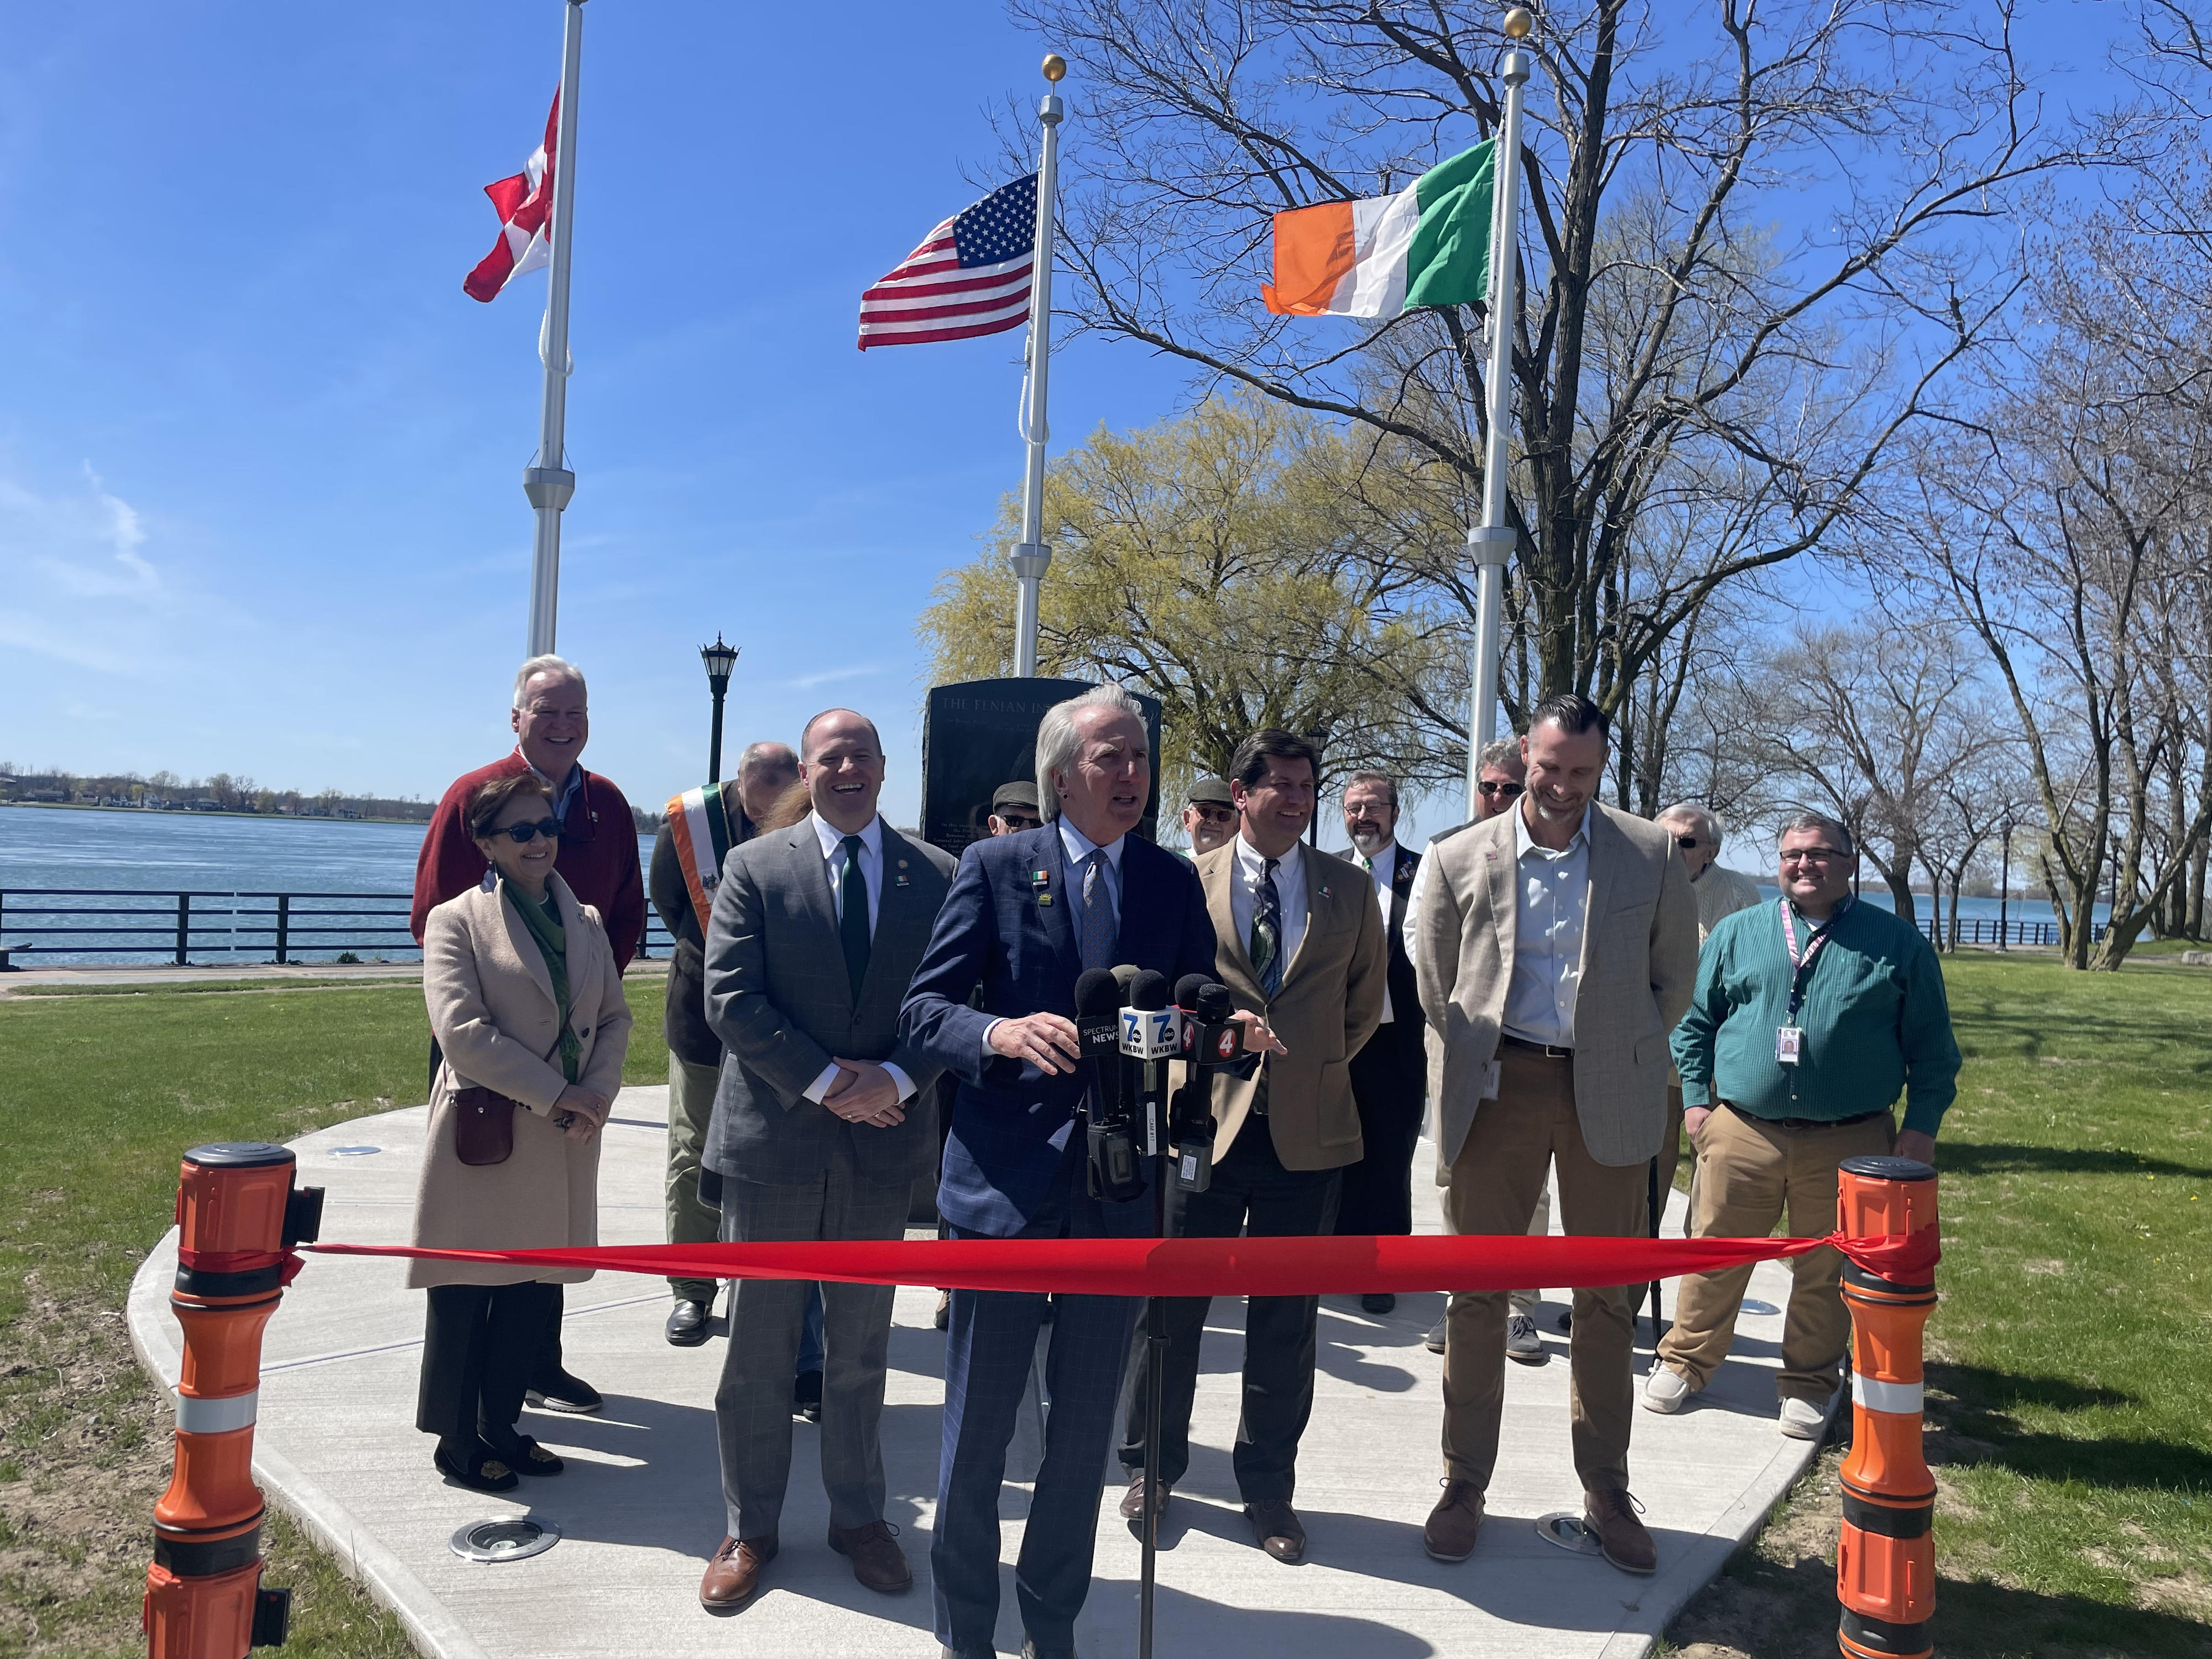 Erie County Executive Mark Poloncarz, State Sen. Tim Kennedy and others dedicate a momument to recognize the Fenian Invasion of 1866 at Towpath Park in Buffalo